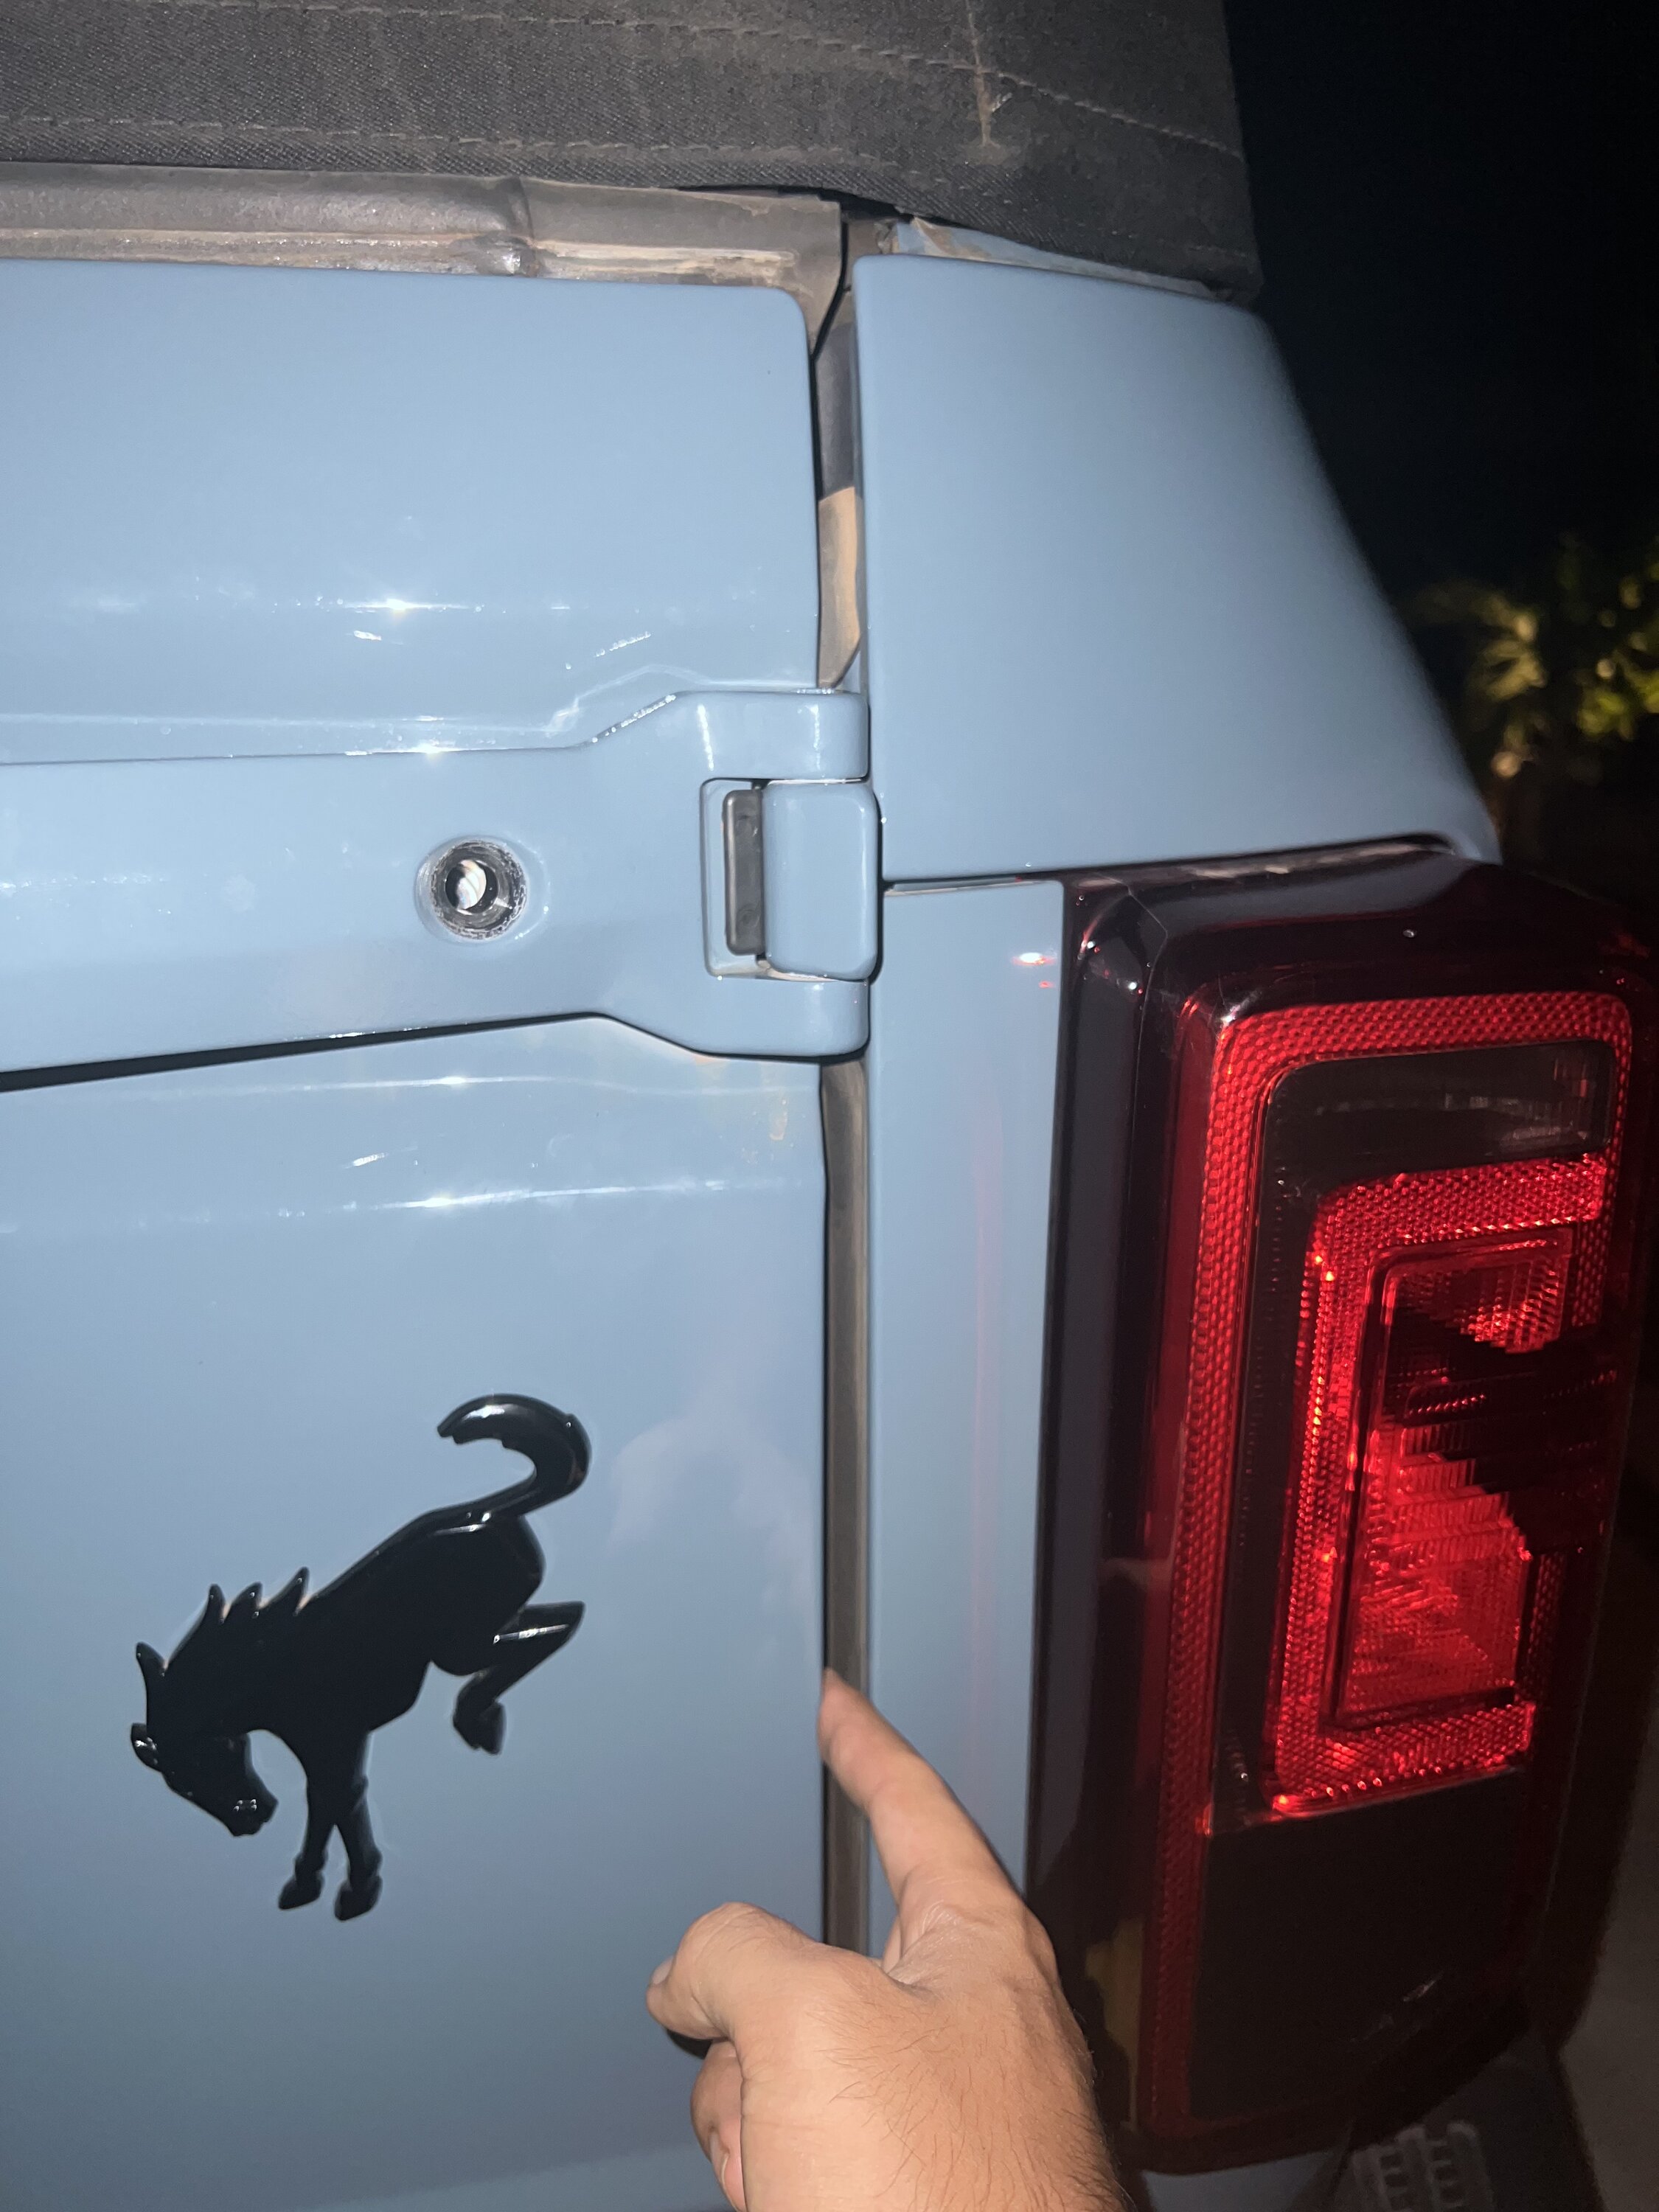 Ford Bronco Anyone know the weight of the tailgate? CA4B2017-2A4A-4C00-AEA2-26C8A2C7C25A